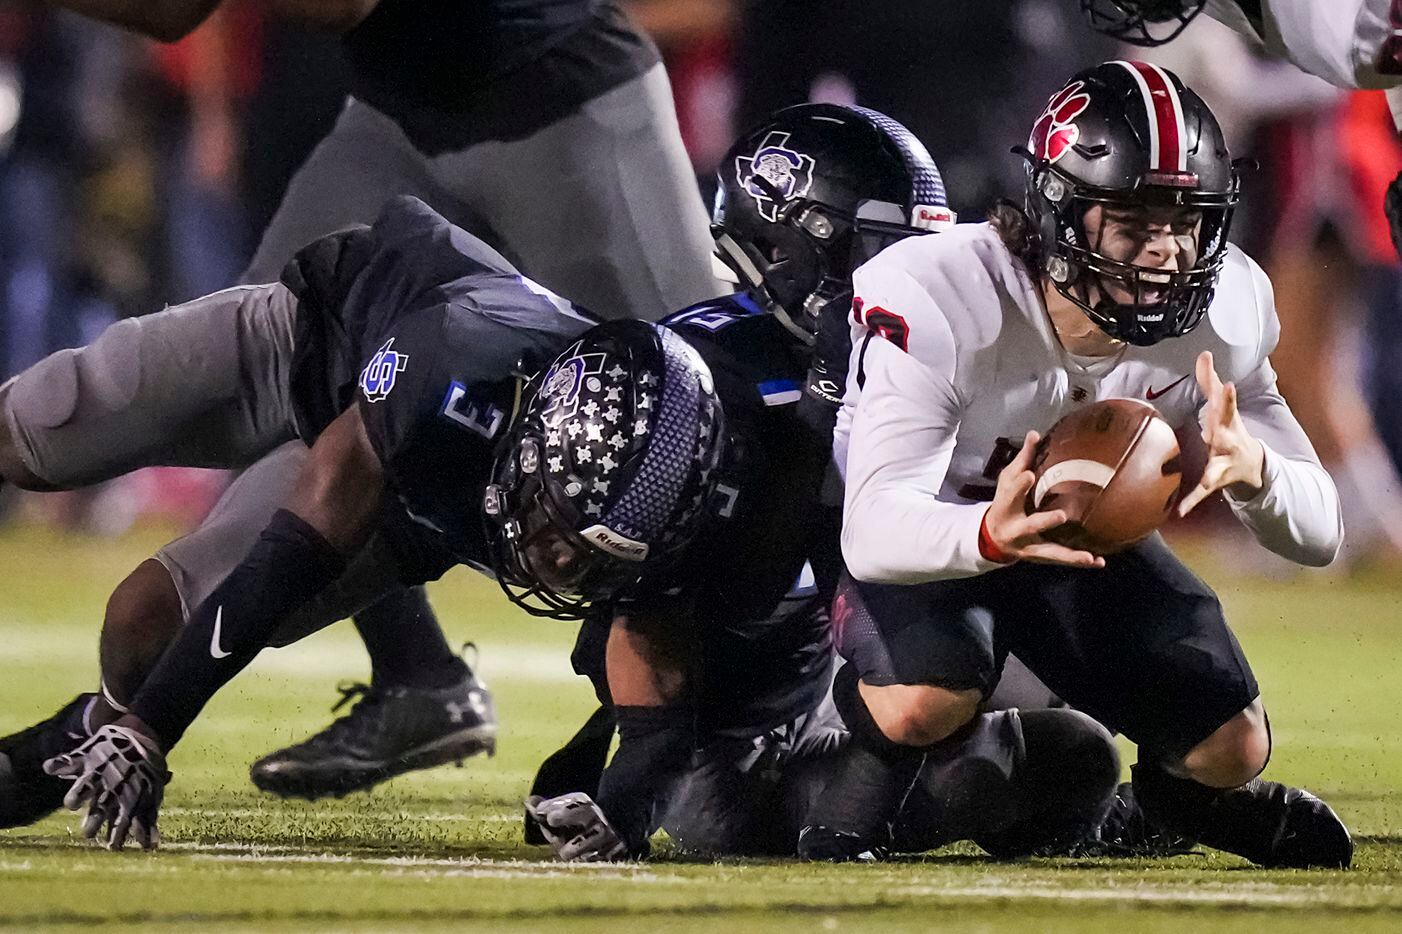 Colleyville Heritage quarterback Luke Ullrich (12) is brought down by Mansfield Summit defensive backs Justyn McDonald (15) and Ahmaad Moses (3) during the first half of the Class 5A Division I Region I final on Friday, Dec. 3, 2021, in North Richland Hills, Texas. (Smiley N. Pool/The Dallas Morning News)